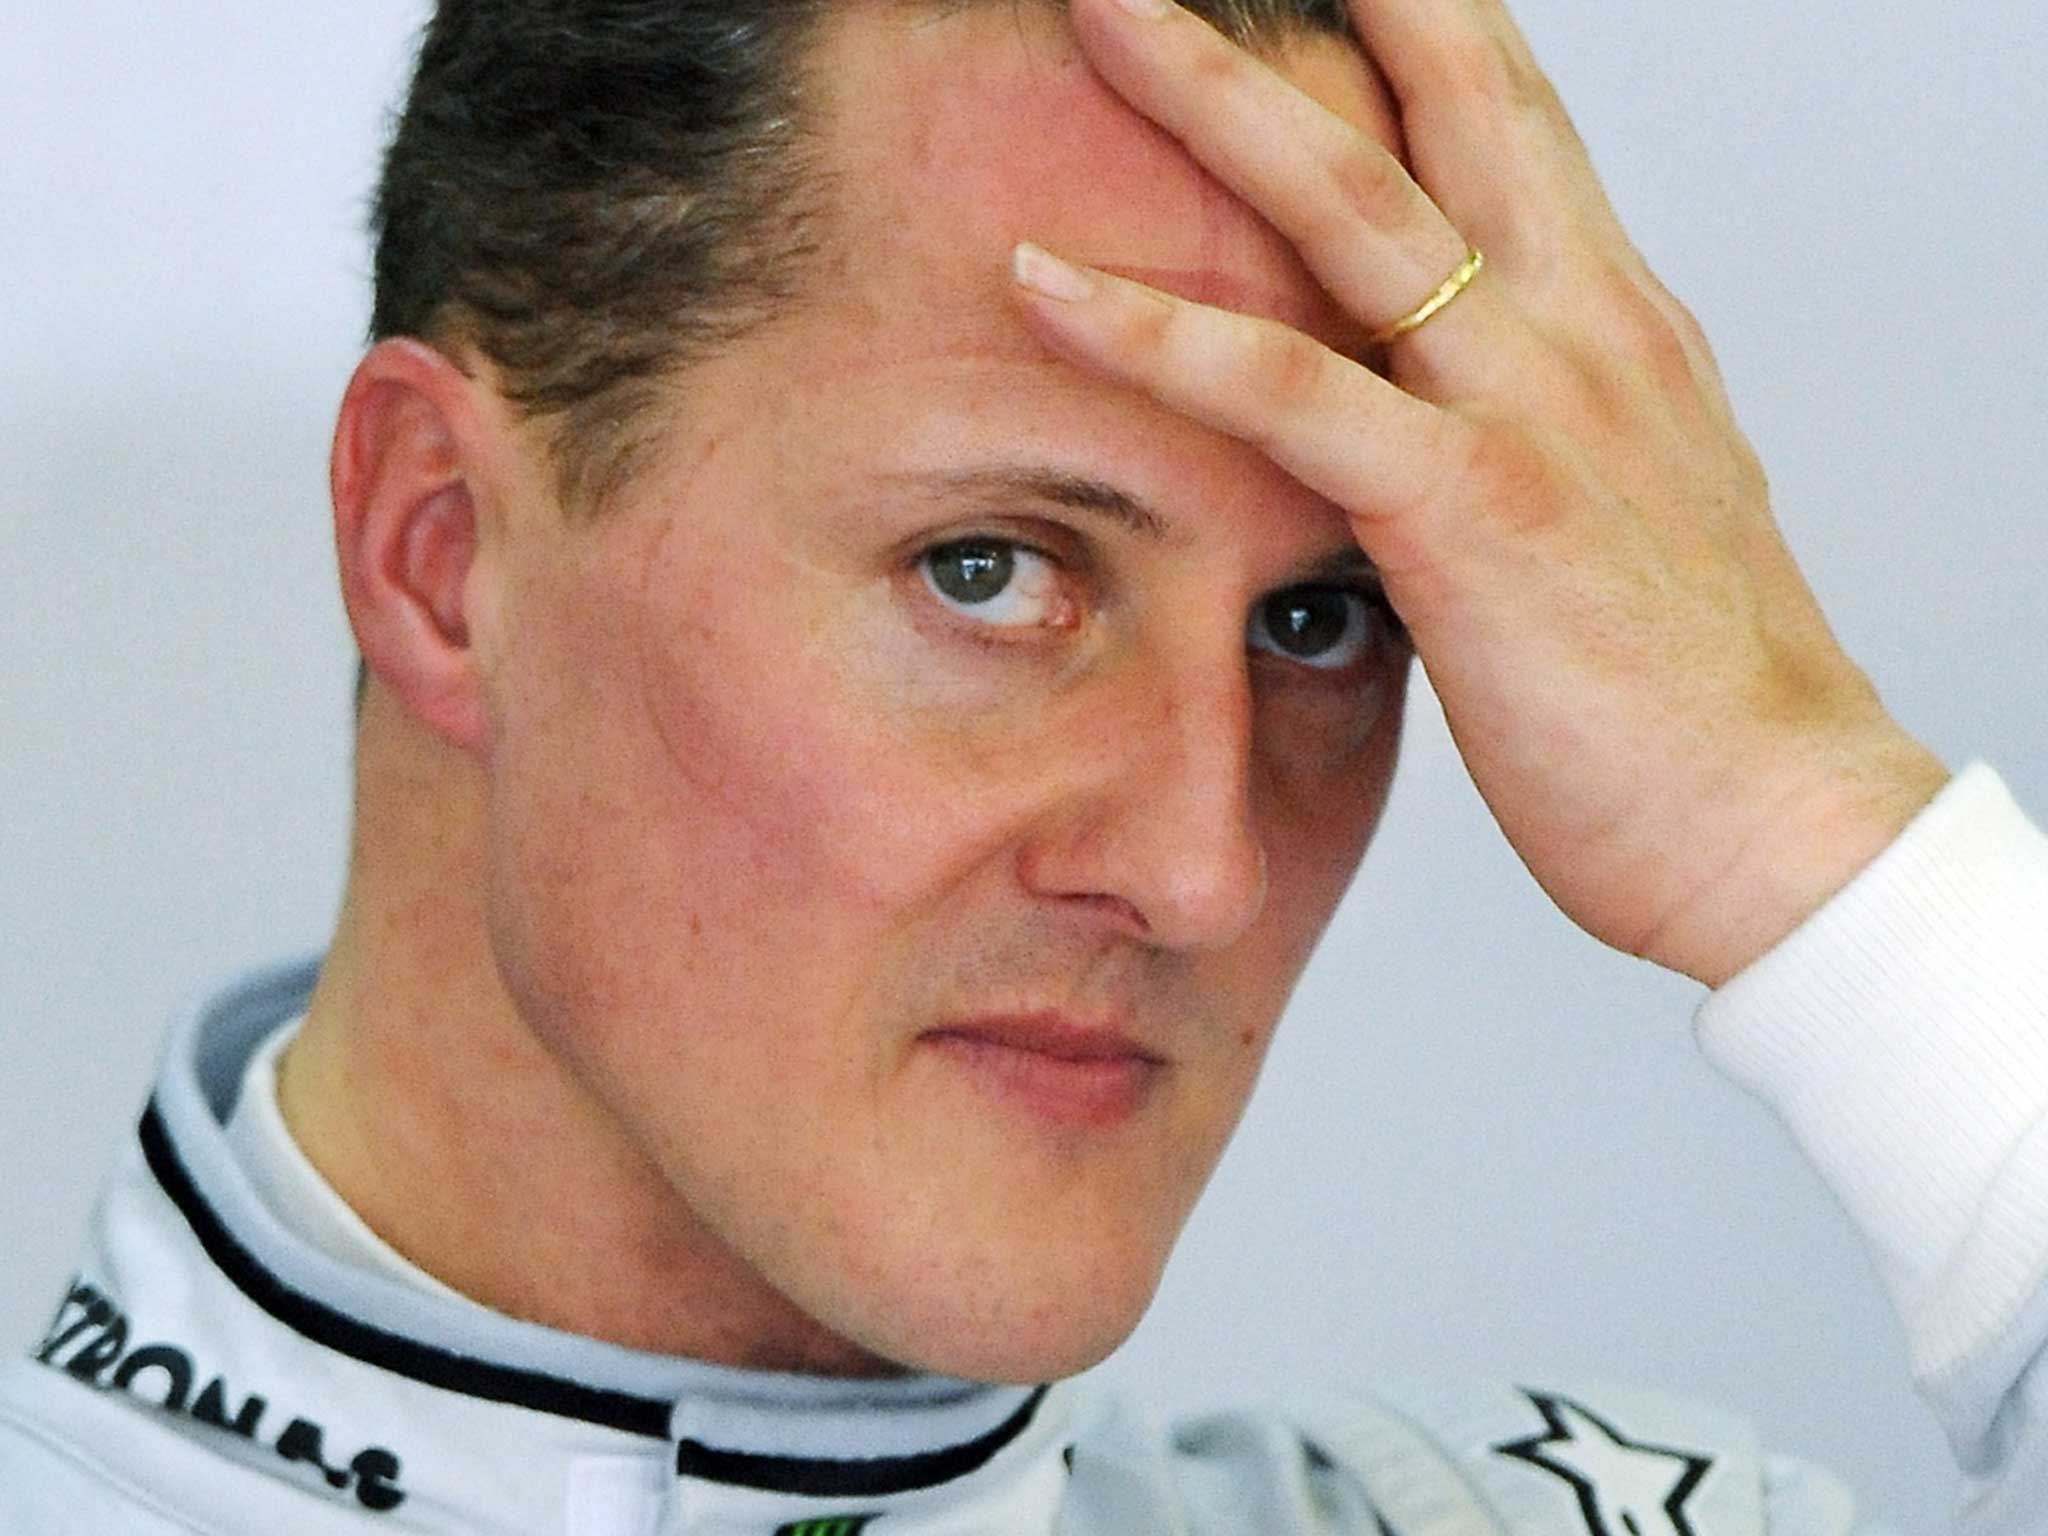 There are conflicting reports about Michael Schumacher's recovery